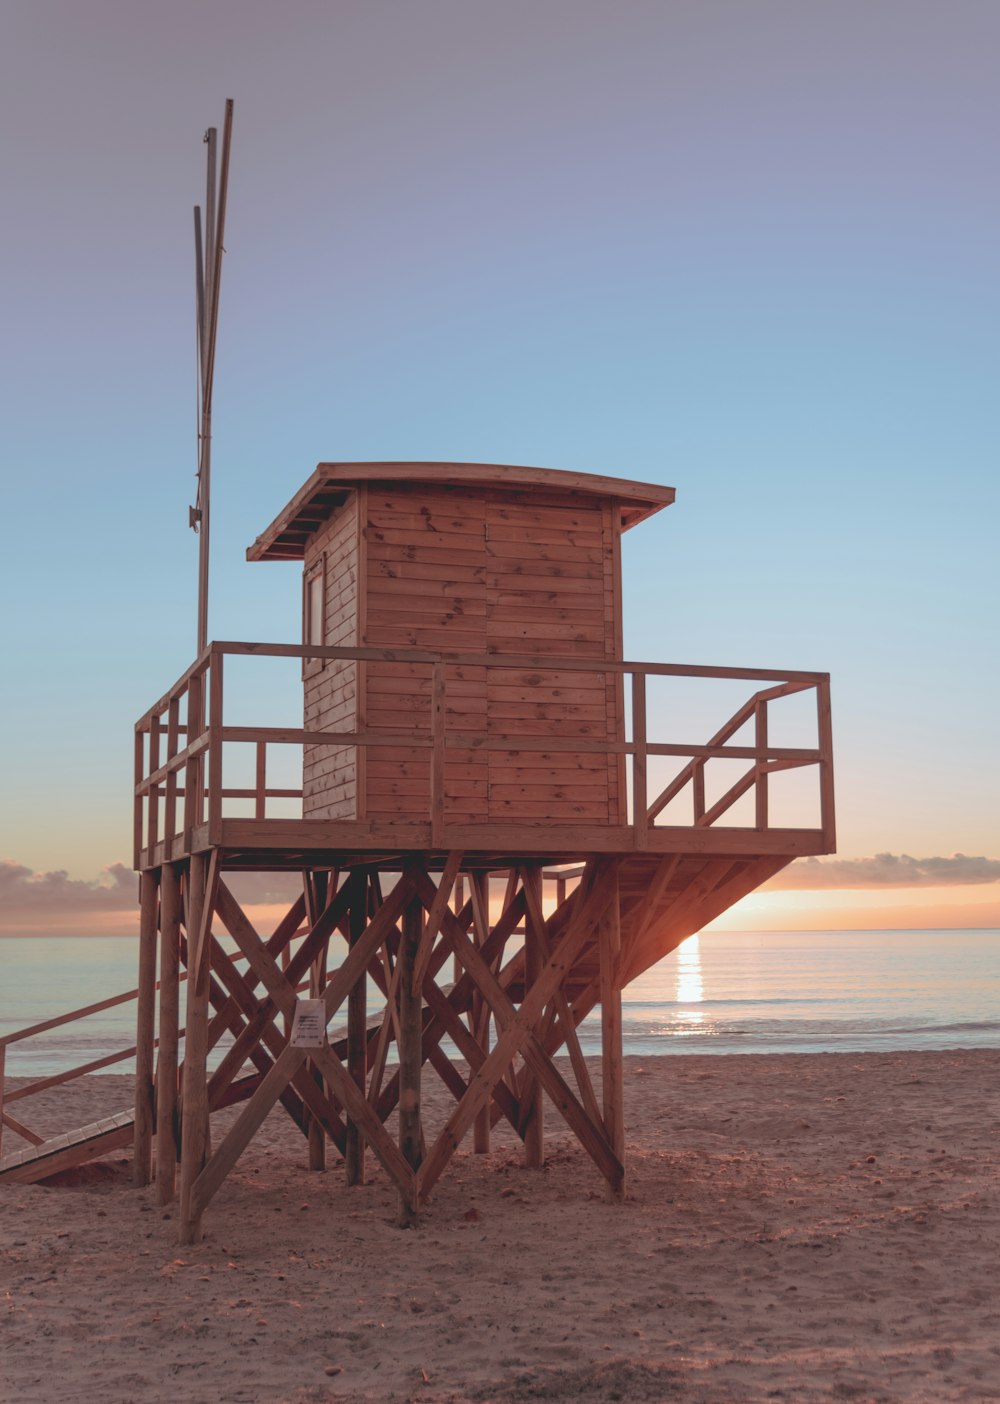 a lifeguard tower on the beach at sunset